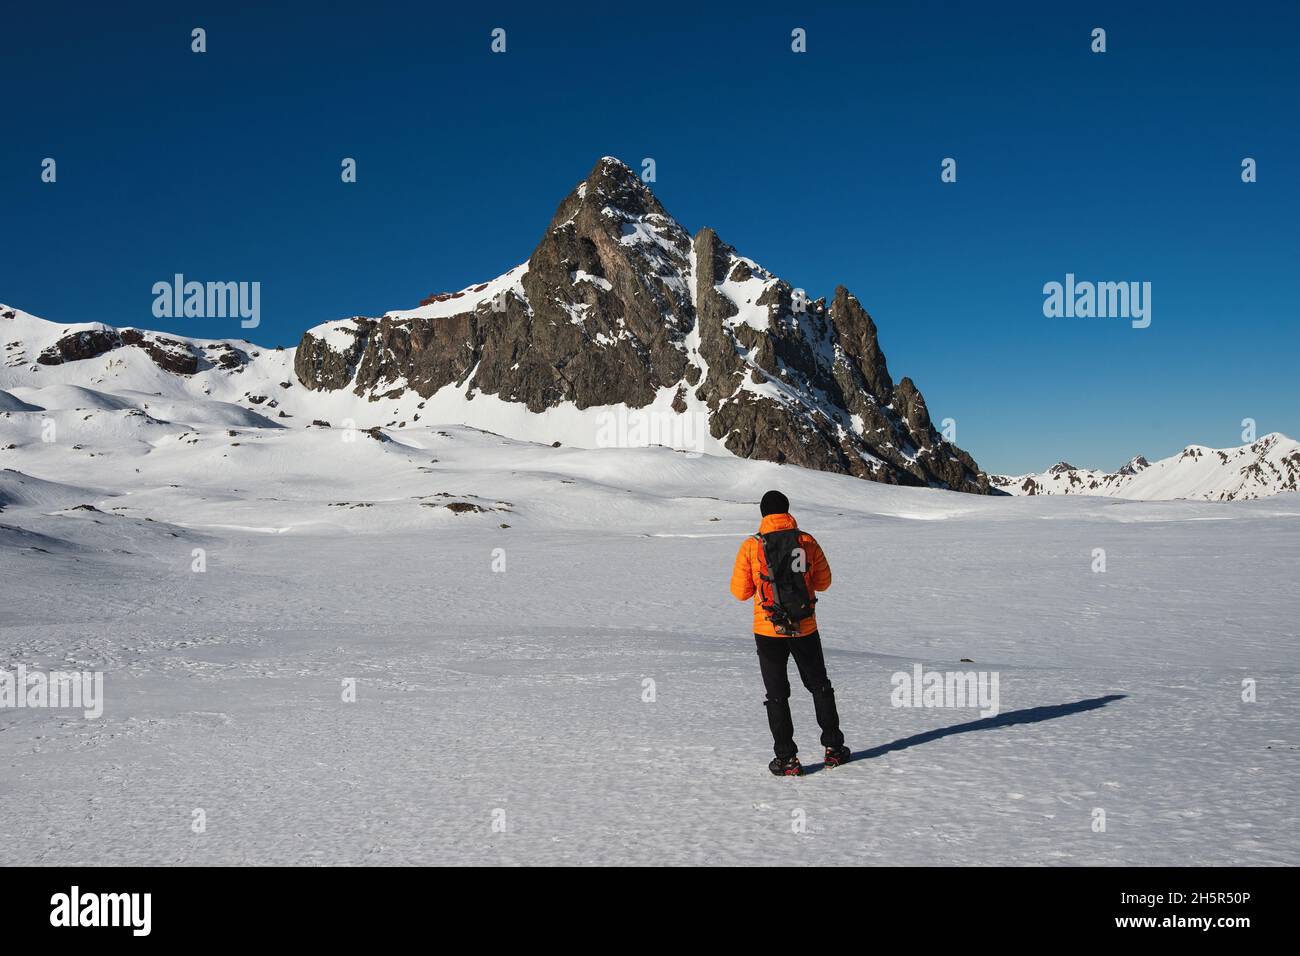 A man in the snowy mountains Stock Photo